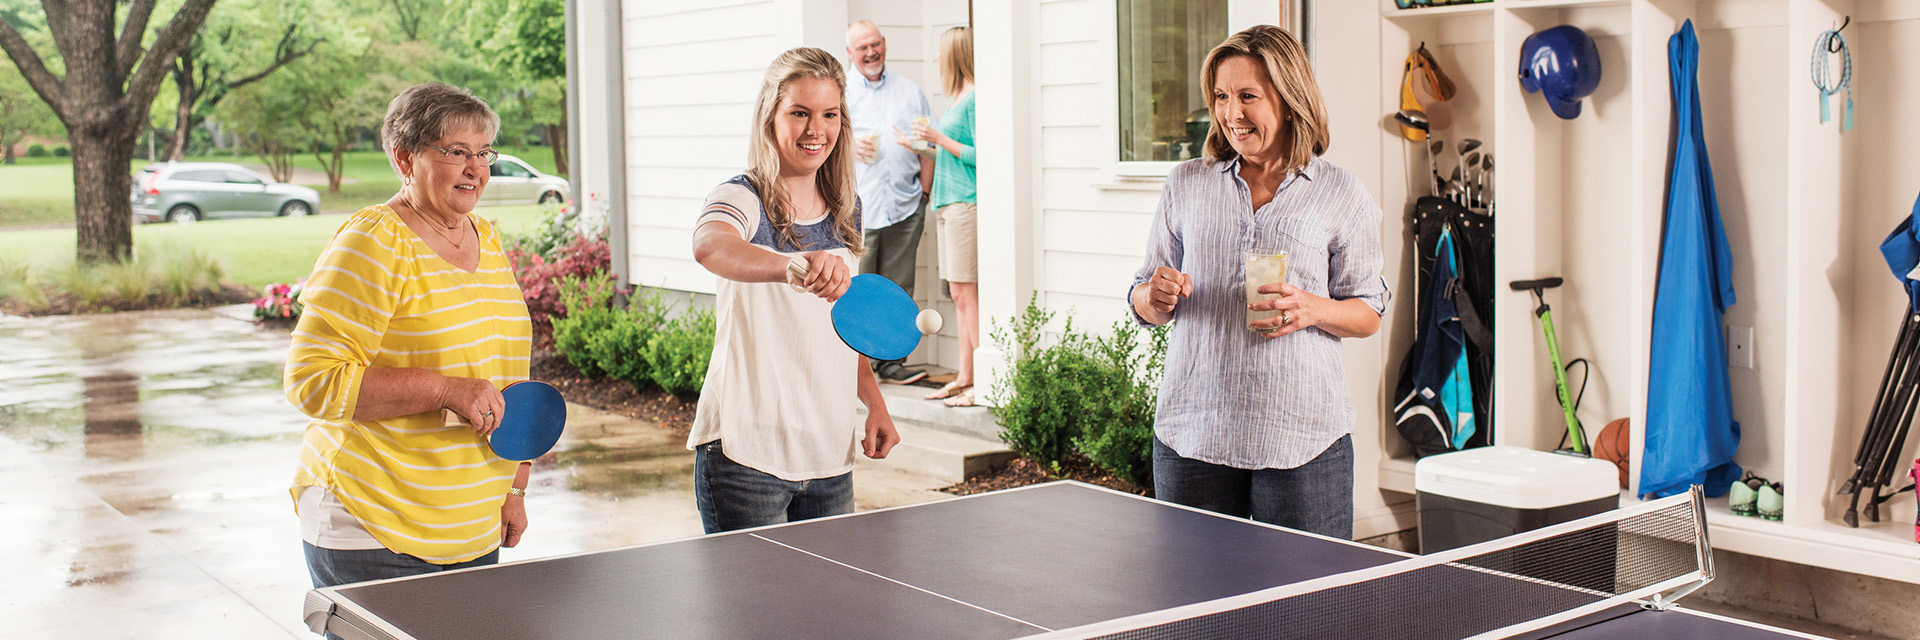 Family playing ping pong